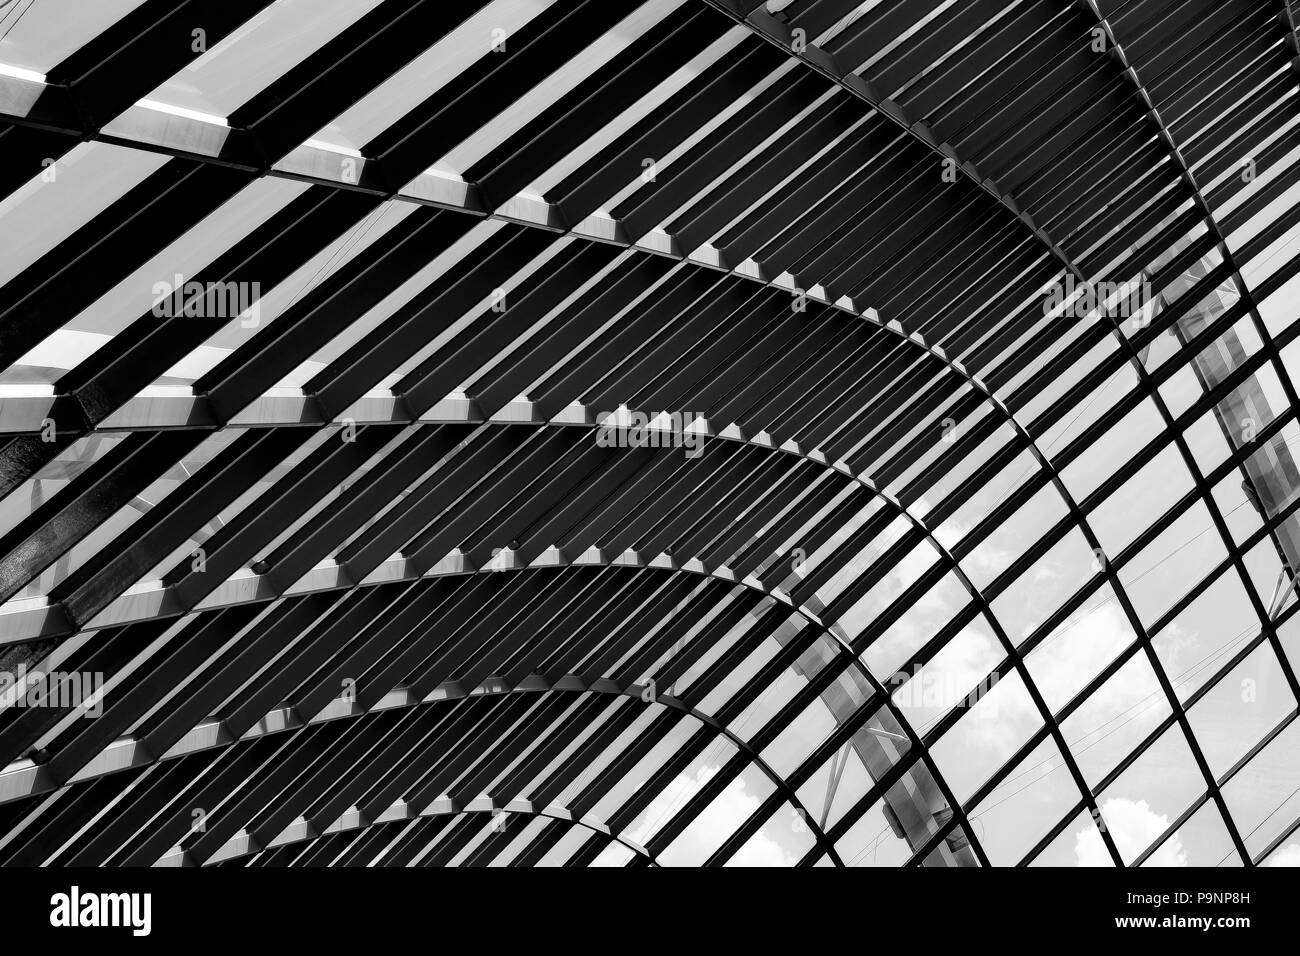 Black and White Abstract Steel Beam Ceiling Structure Stock Photo